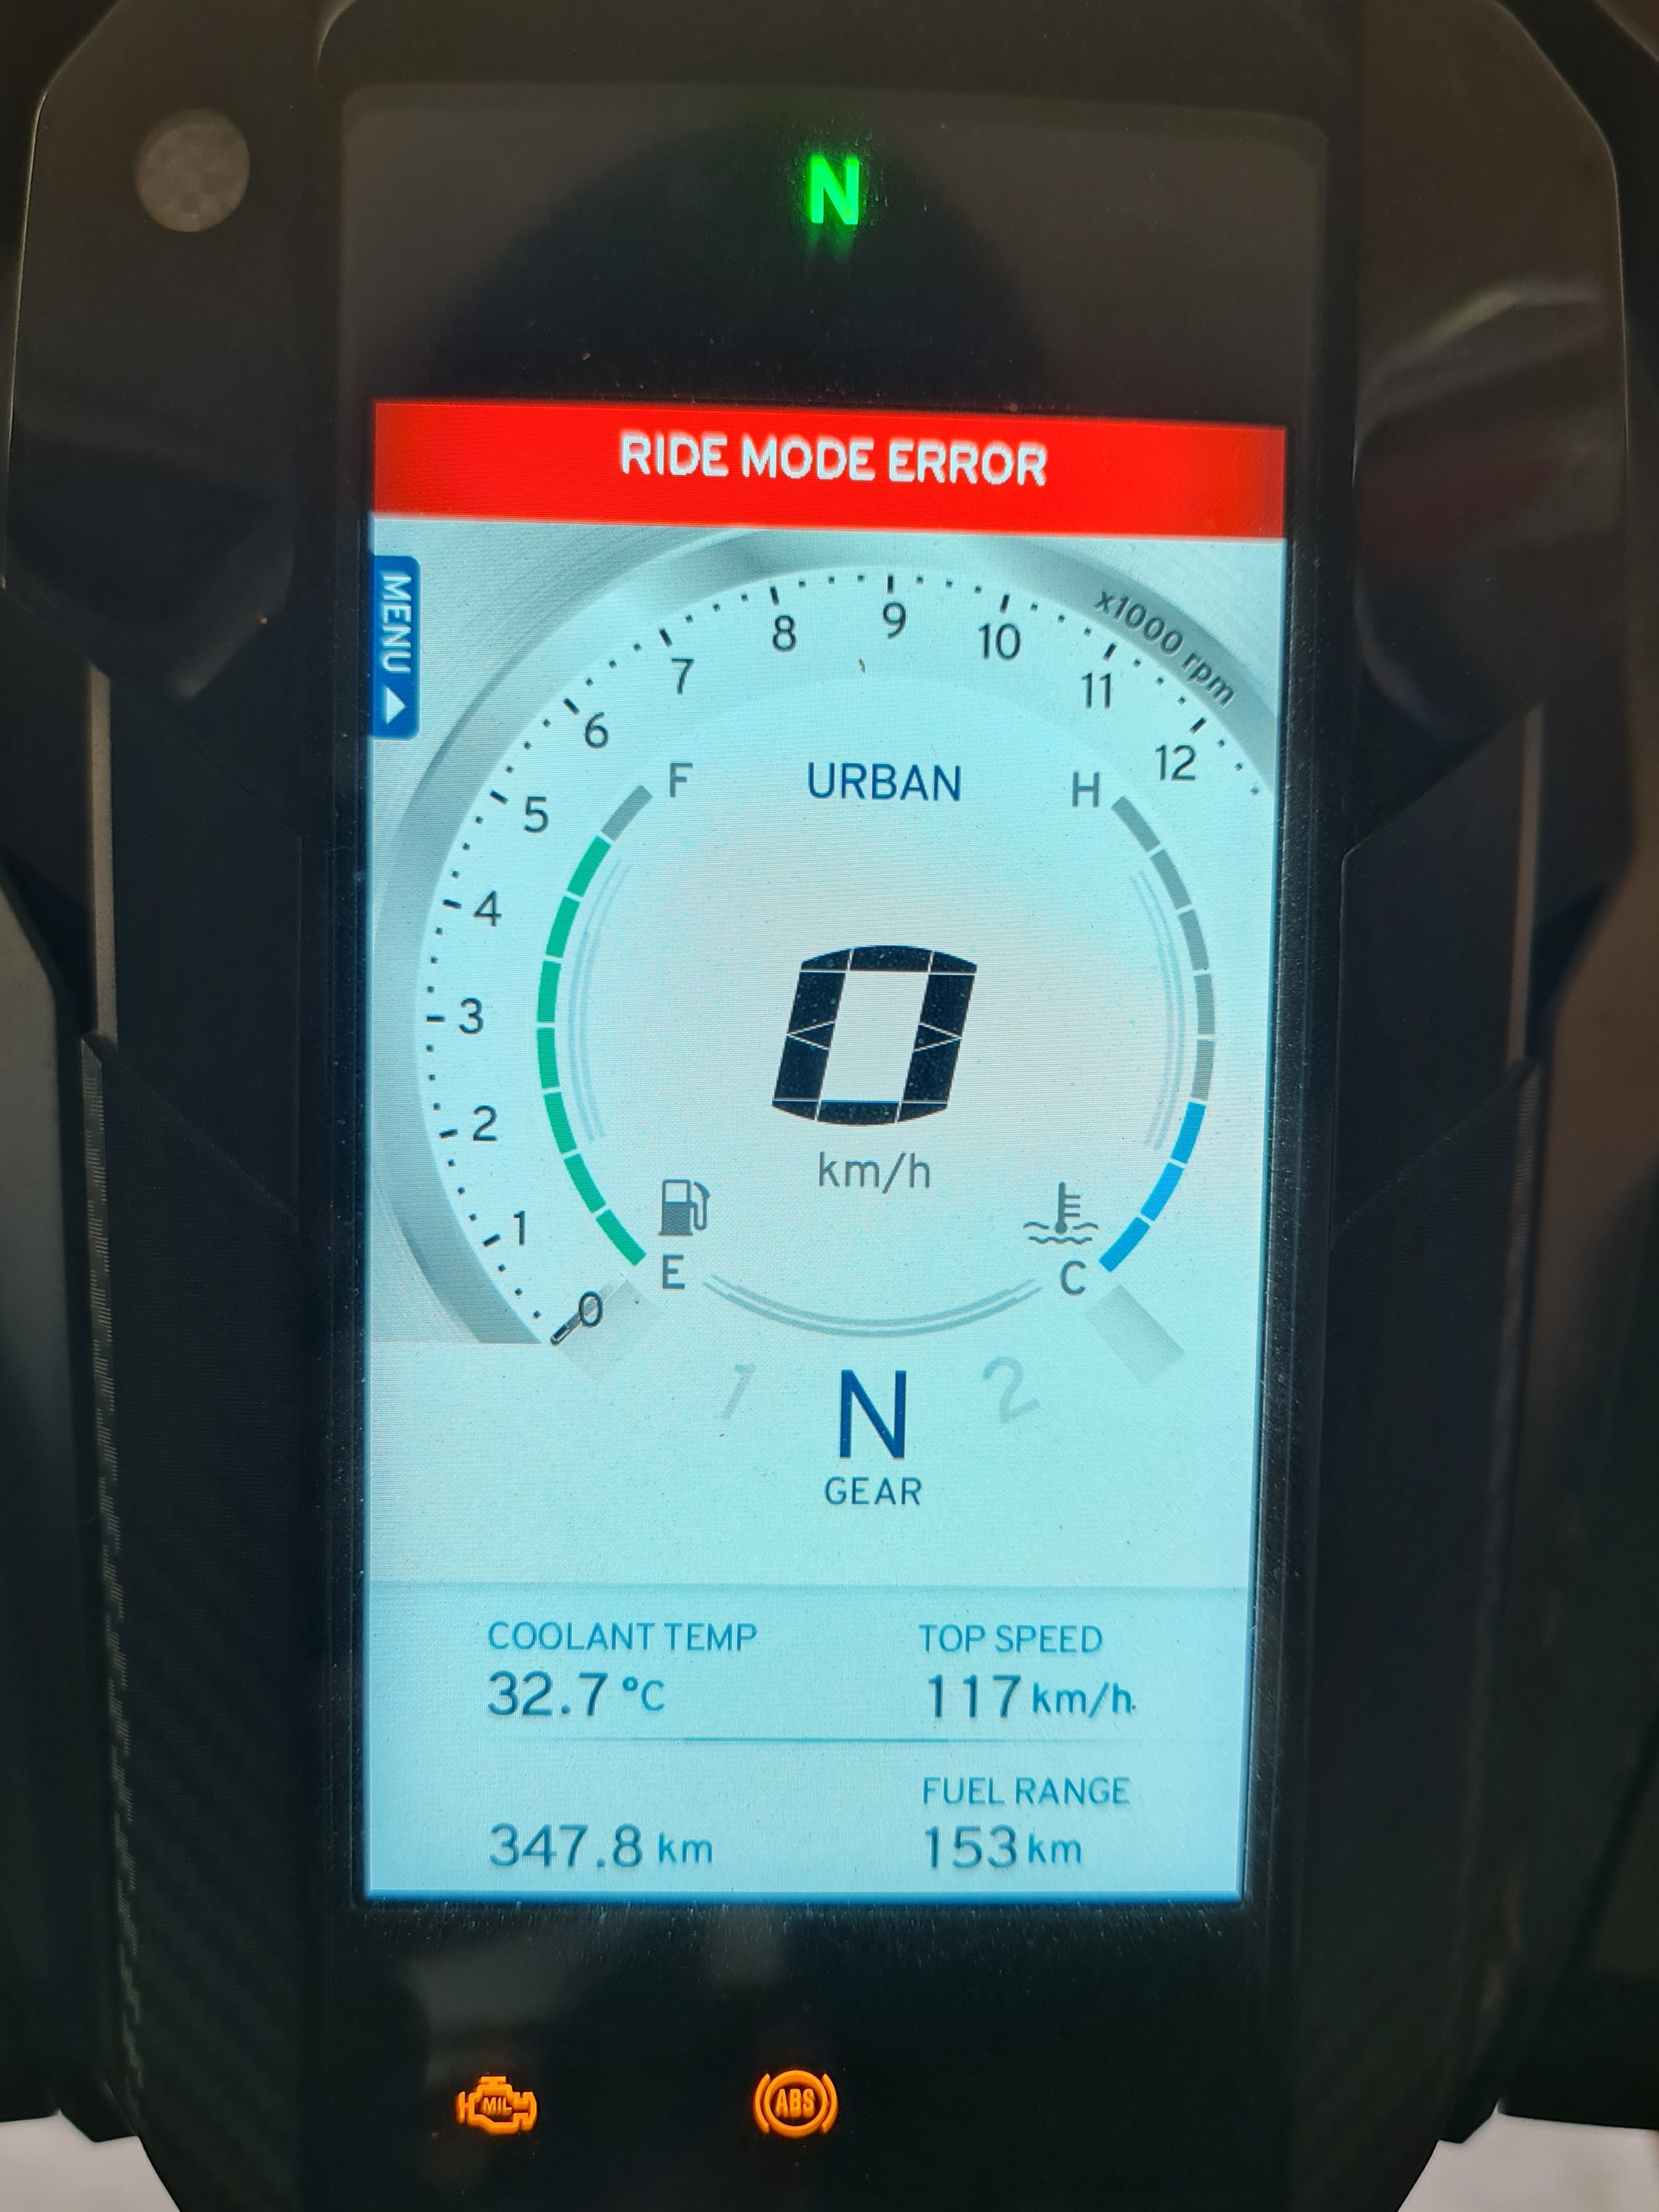 What could be the reason for RIDE MODE ERROR,  ABS MALFUNCTION  and ENGINE MALFUNCTION shown on my RR 310 BS6?